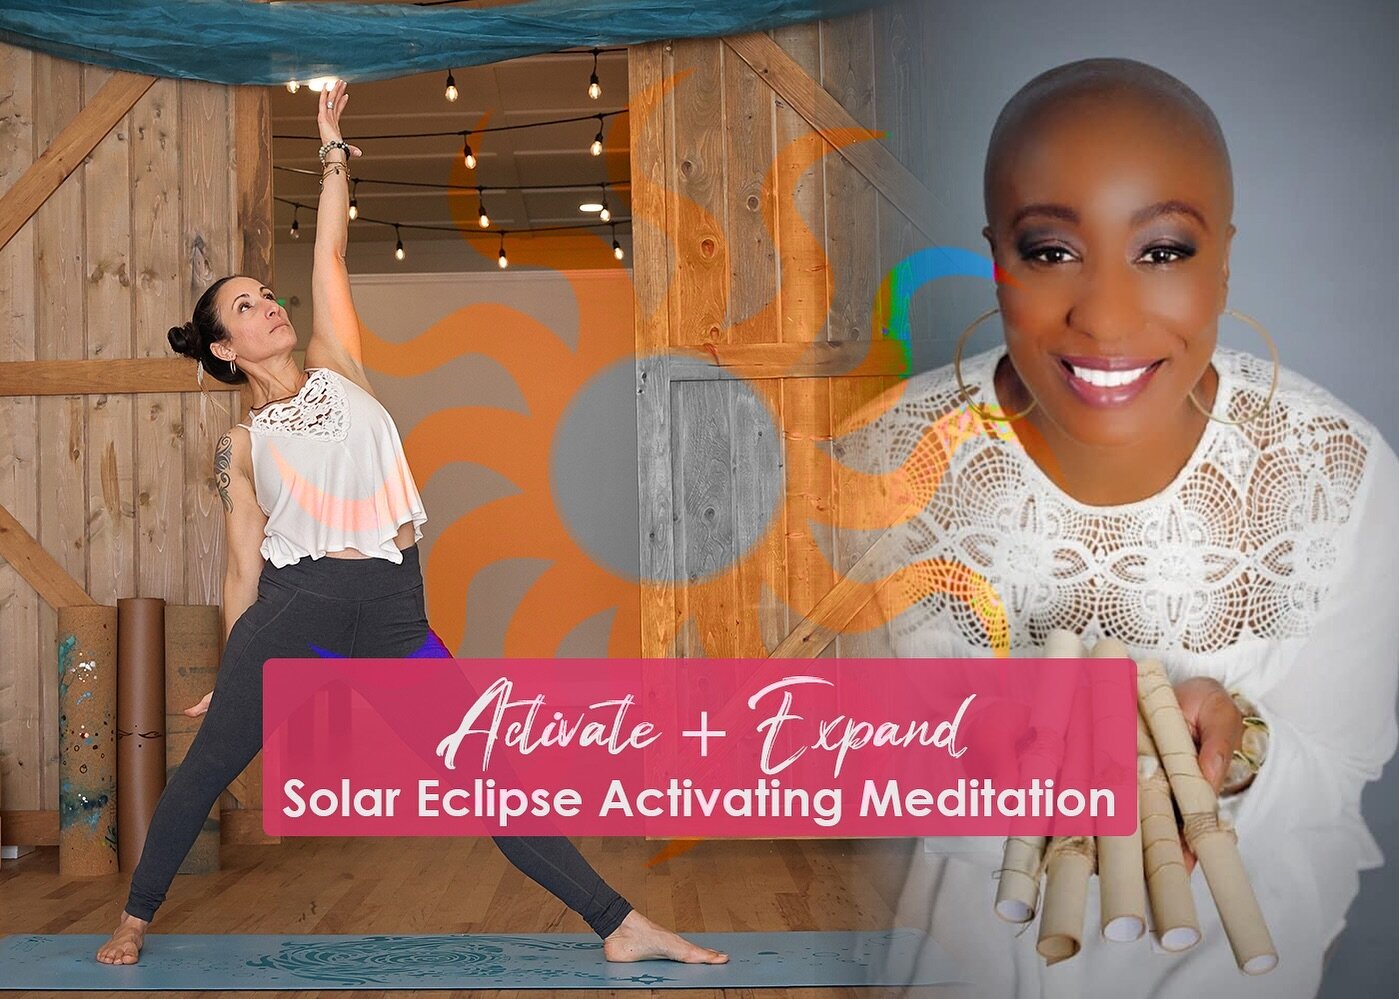 This Monday, Join Bumi Benjamin and I for a FREE guided meditation LIVE on ZOOM.

Let&rsquo;s come together to activate and expand our energy during this exciting time, and elevate to higher vibrations.

Ifa&rsquo;s meditations are amazingly soothing